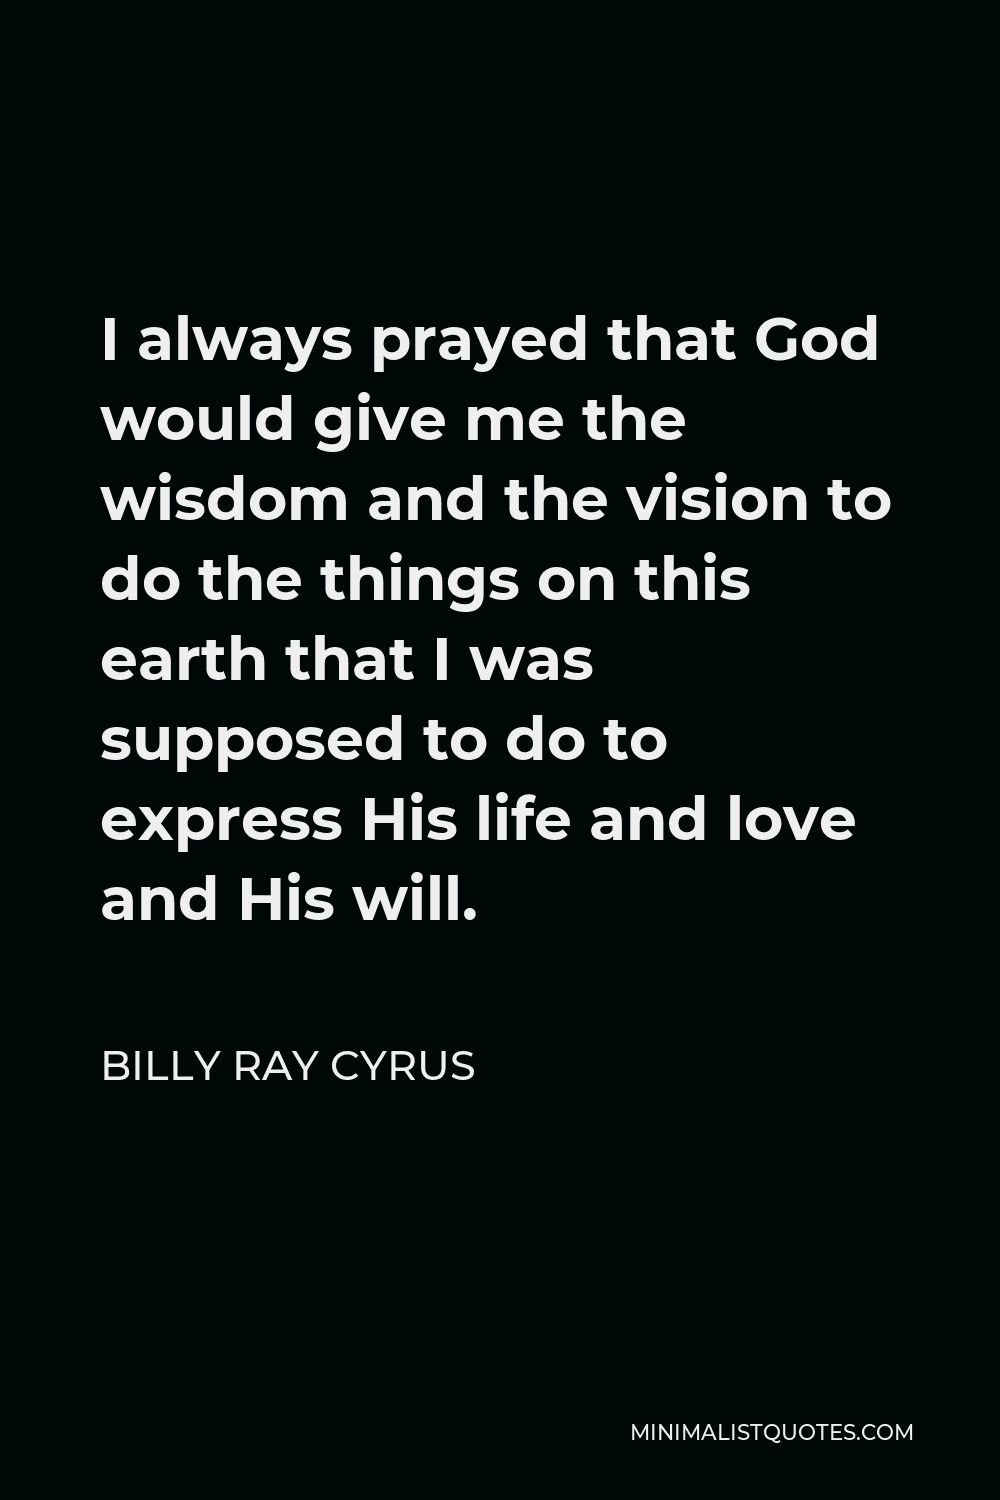 Billy Ray Cyrus Quote - I always prayed that God would give me the wisdom and the vision to do the things on this earth that I was supposed to do to express His life and love and His will.